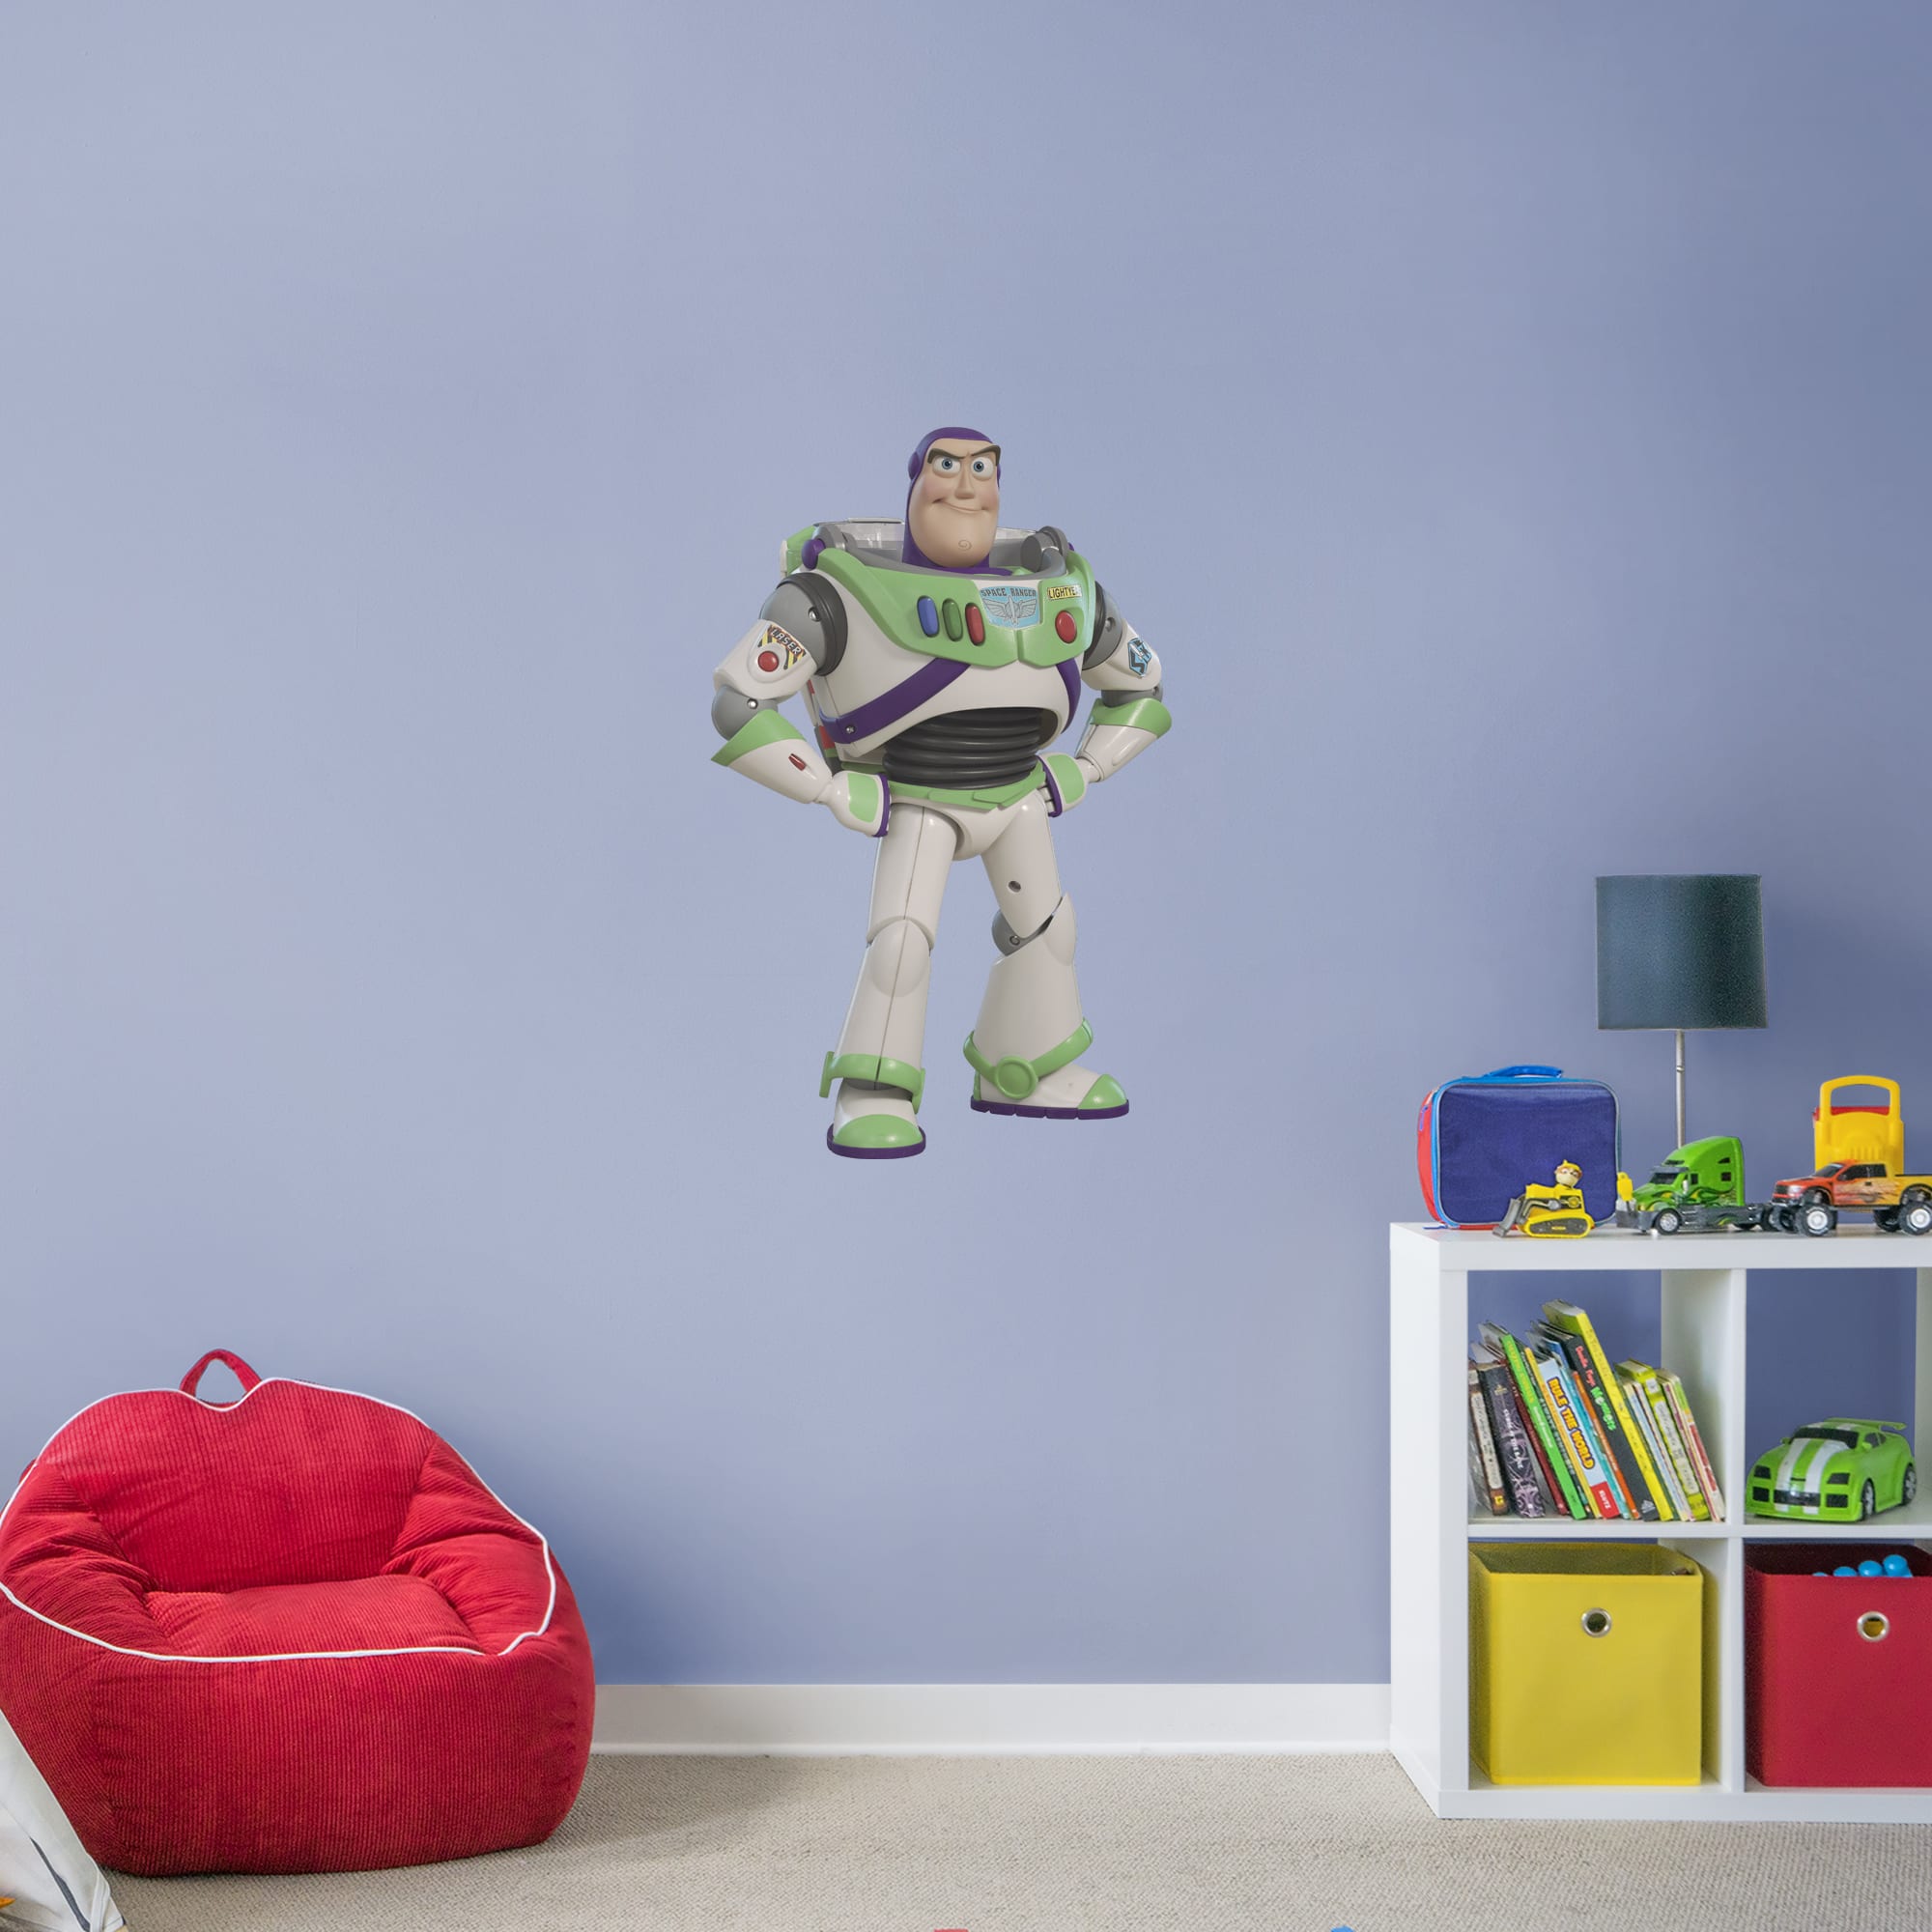 Toy Story 4: Buzz Lightyear - Officially Licensed Disney/PIXAR Removable Wall Decal XL by Fathead | Vinyl